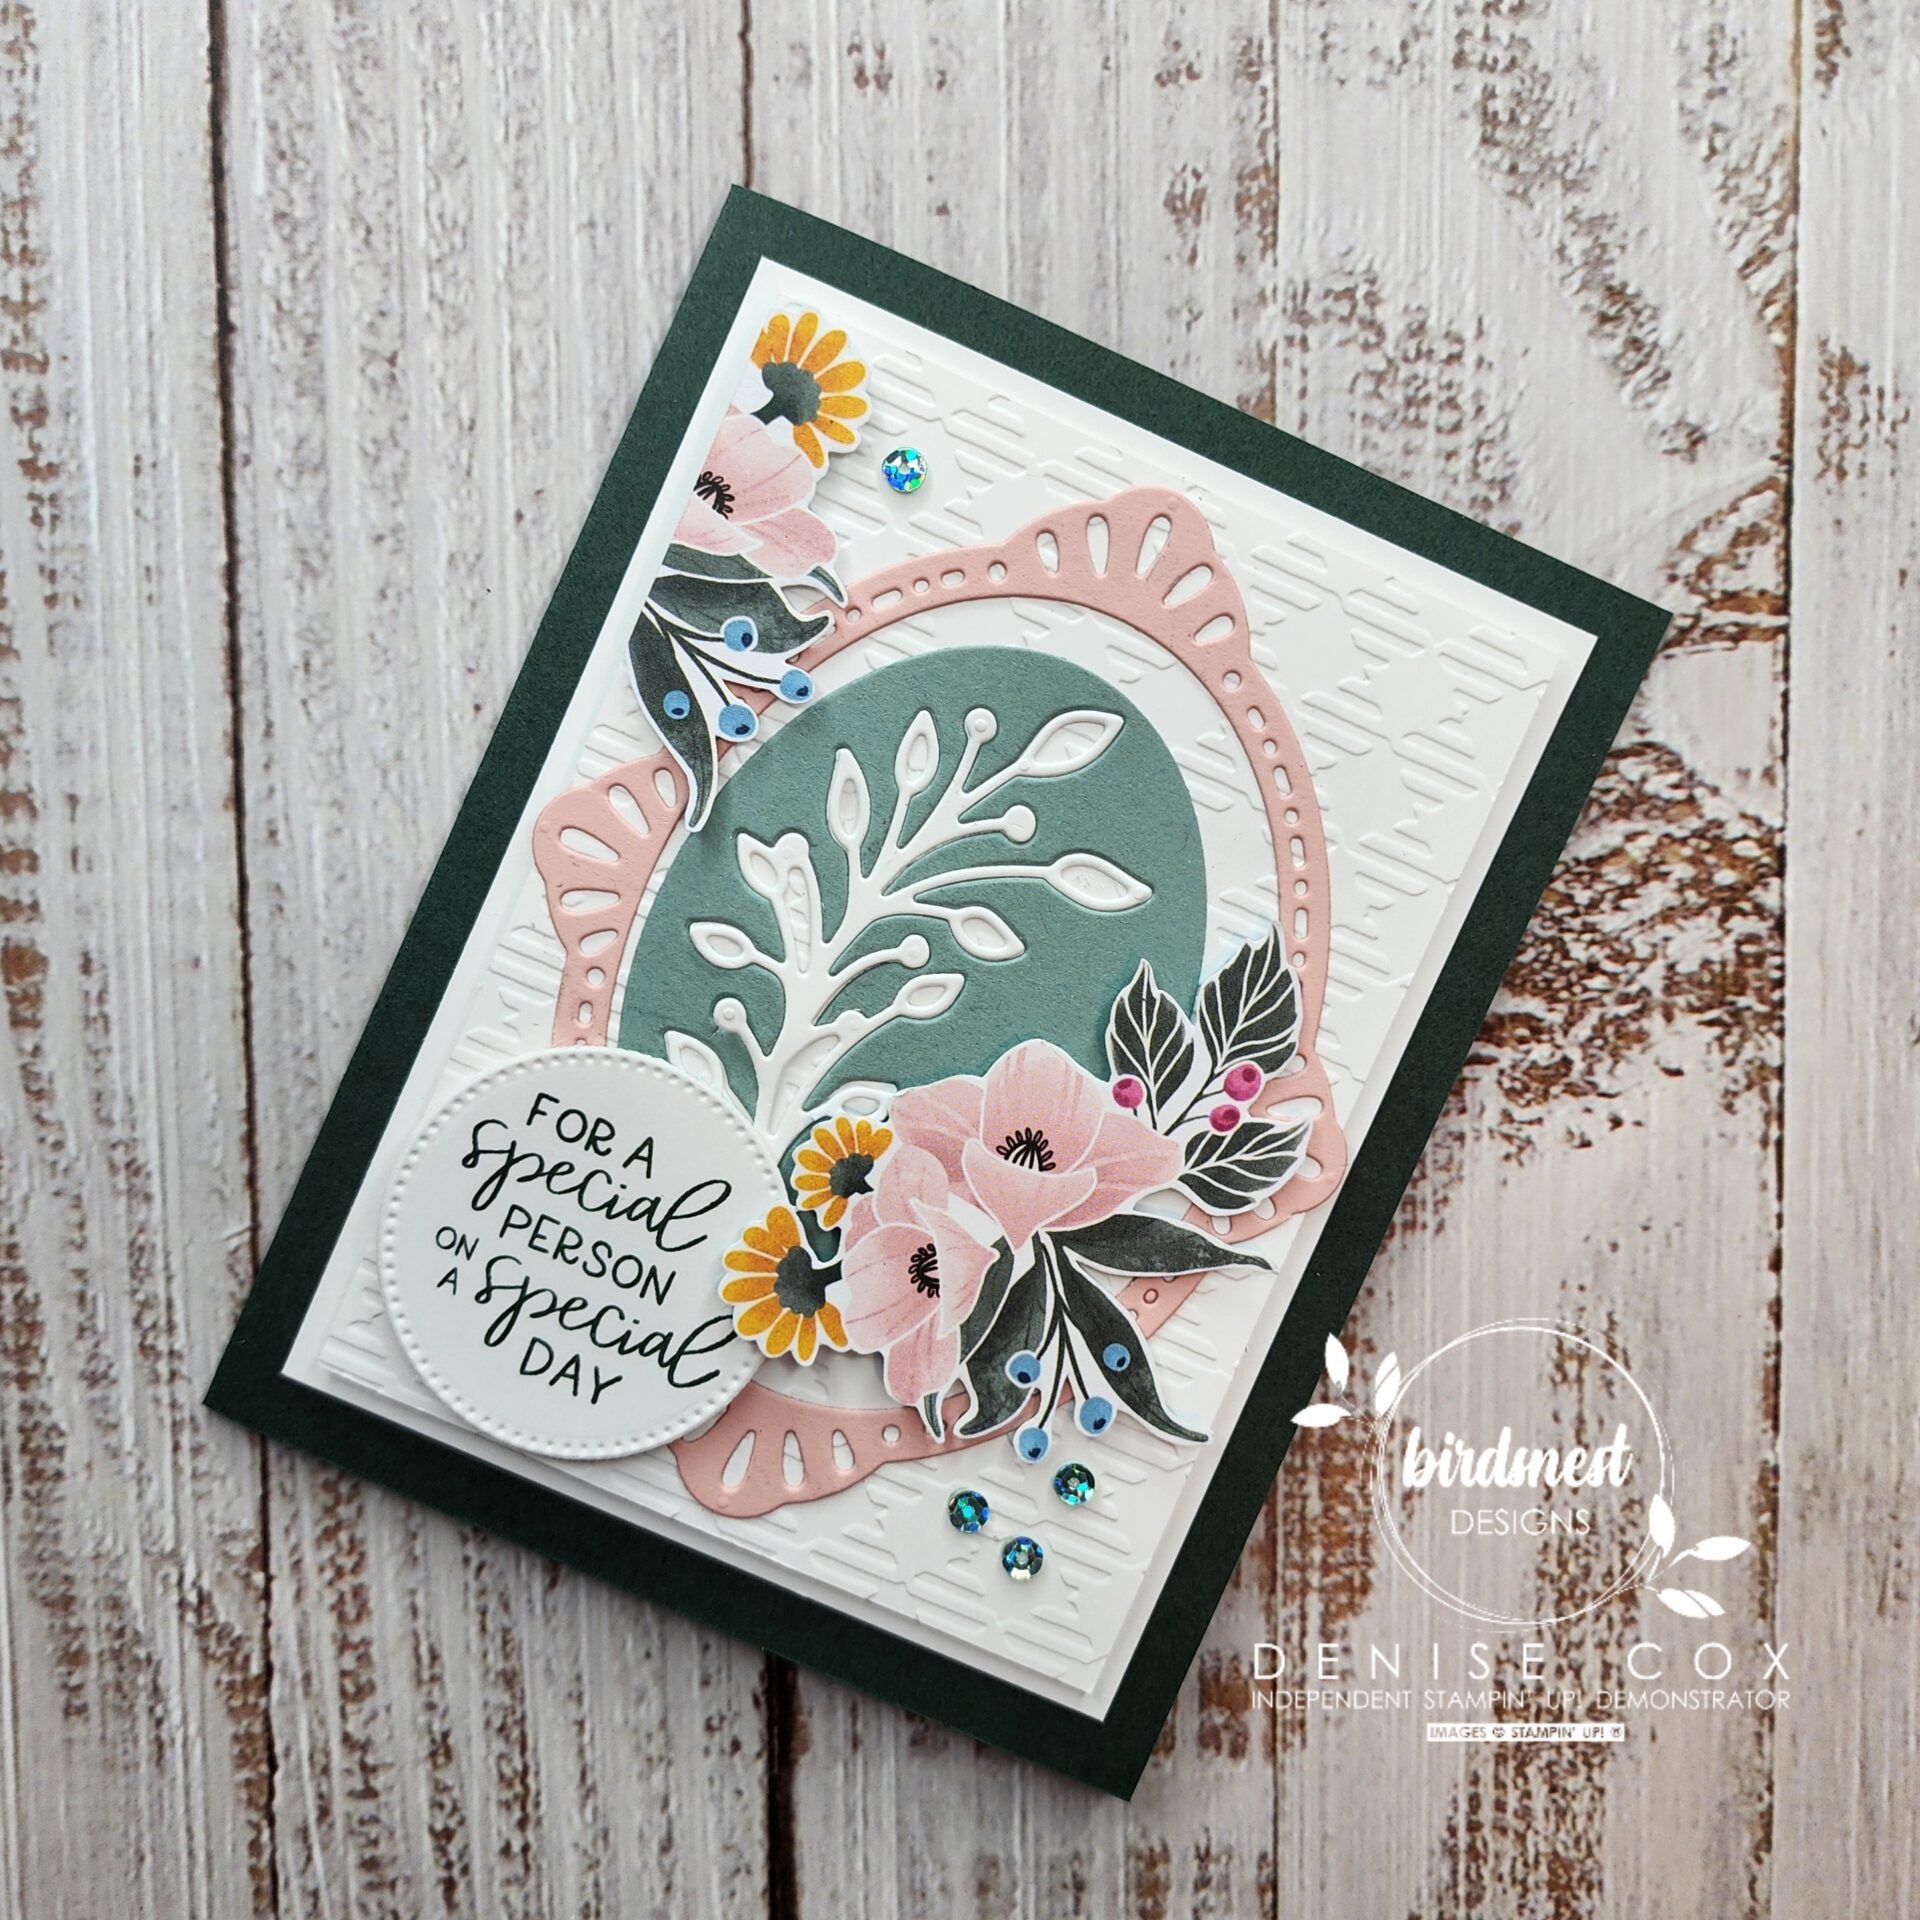 Birthday card made by Denise Cox using the Stampin' Up! Fitting Florets Collection